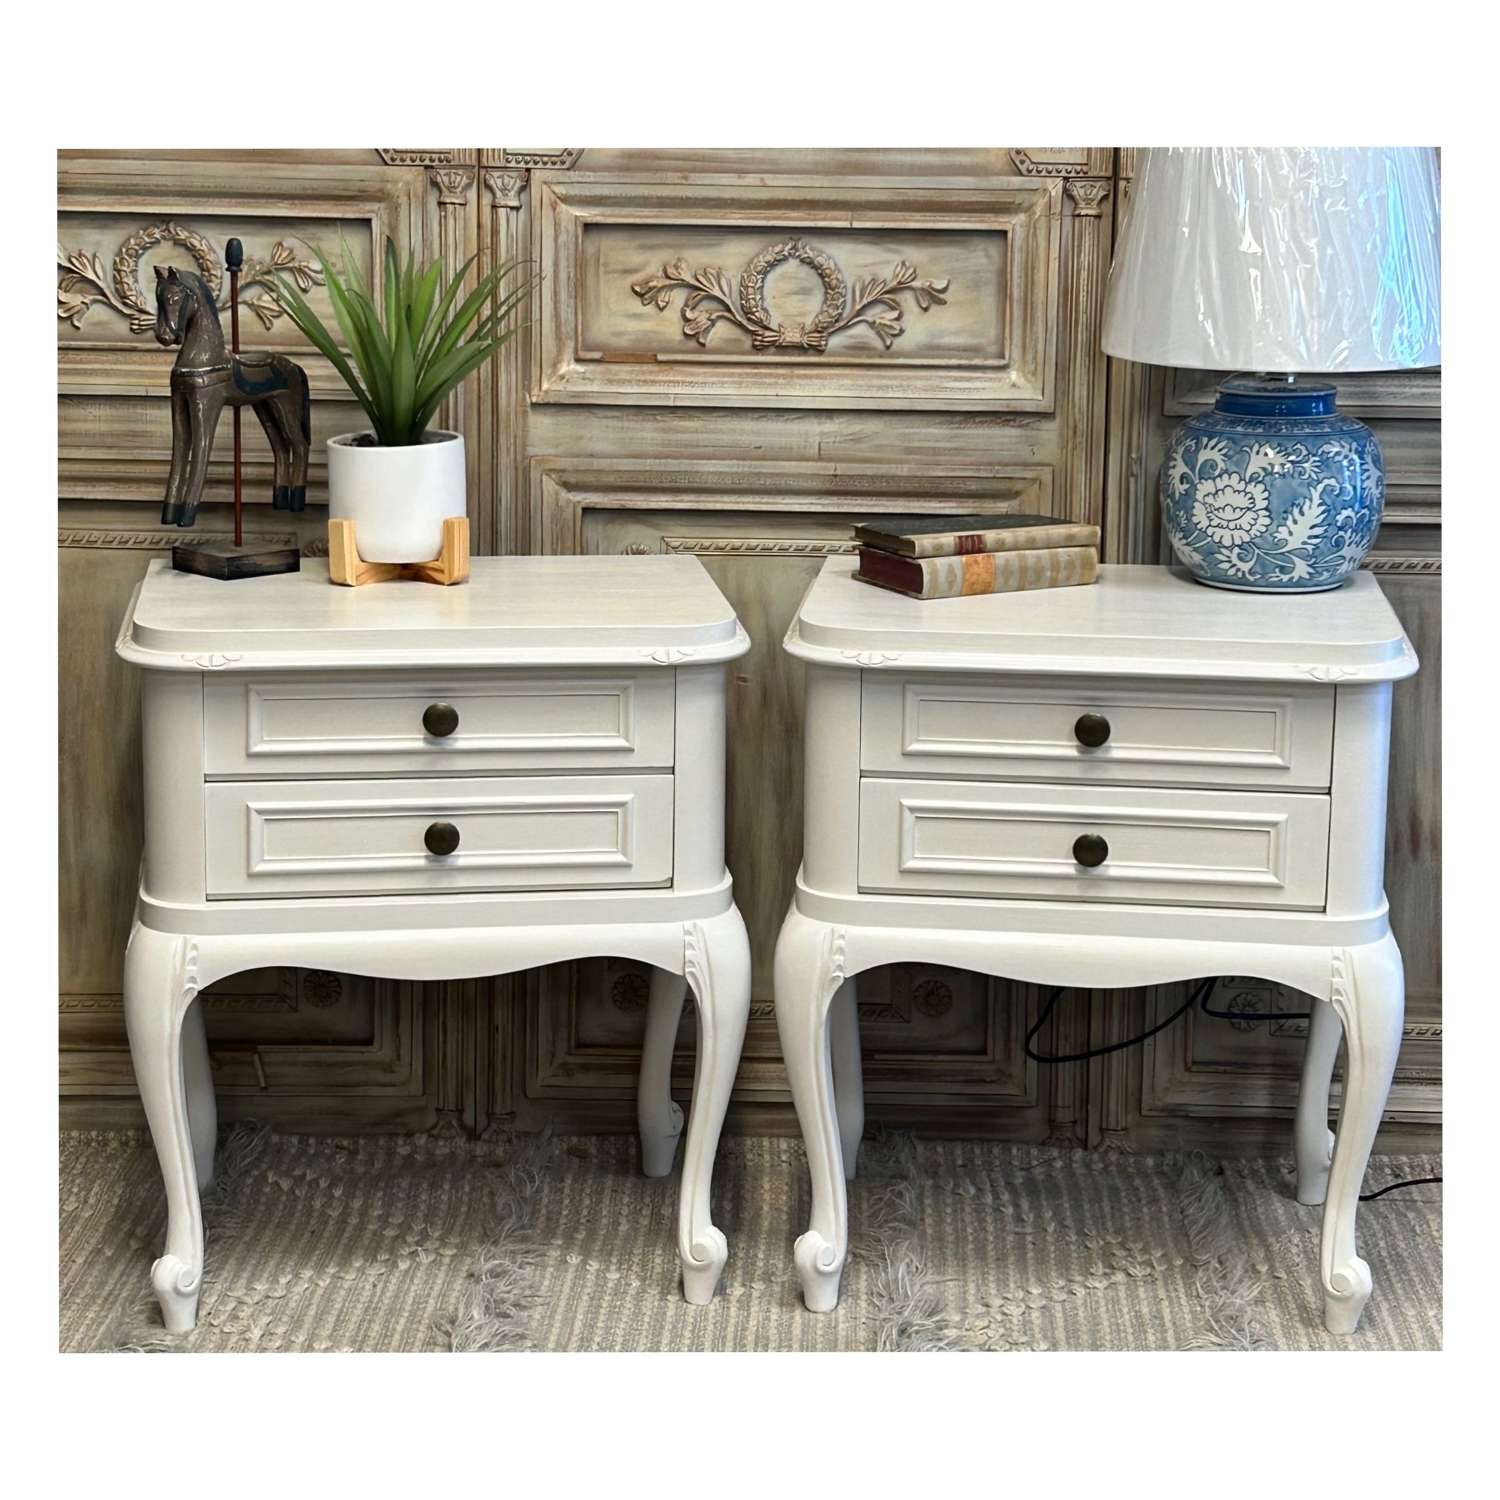 Pair of French Bedside Tables - Painted in Rolling Fog